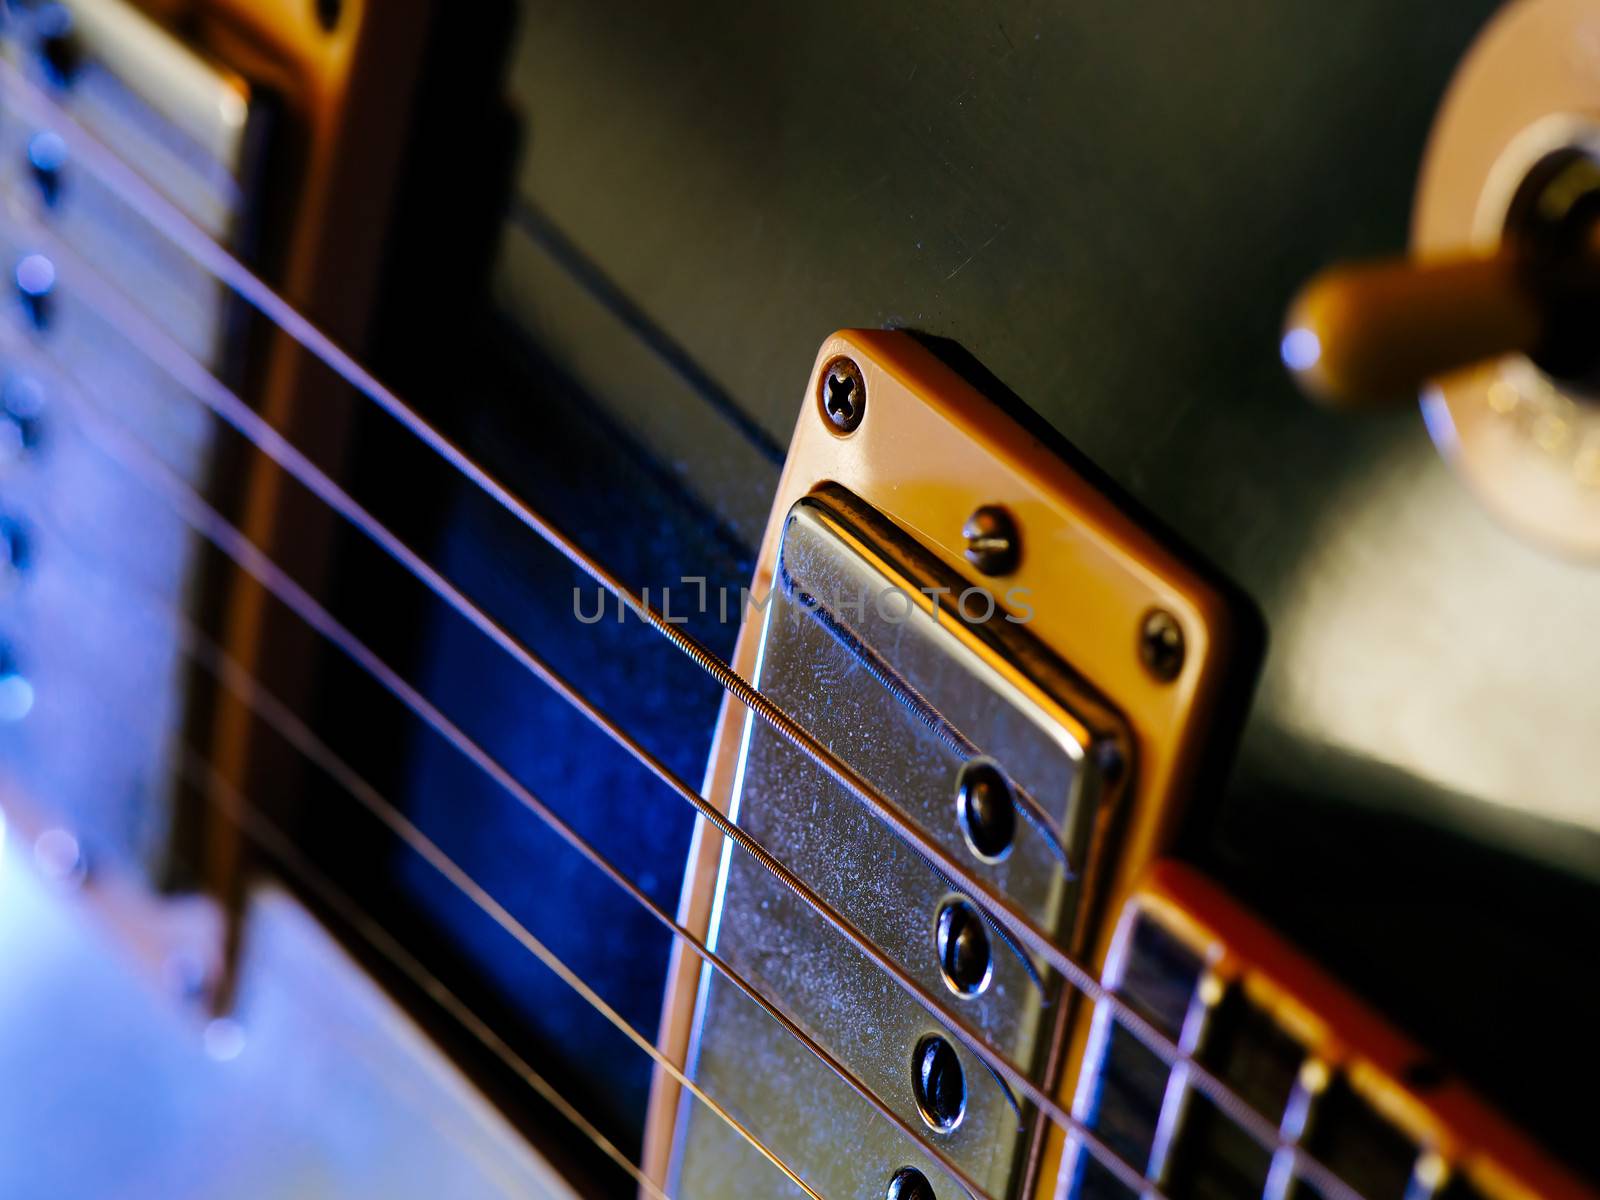 Macro abstract photo of the pickups and strings of an electric guitar. Shallow depth of field with focus on the first string.